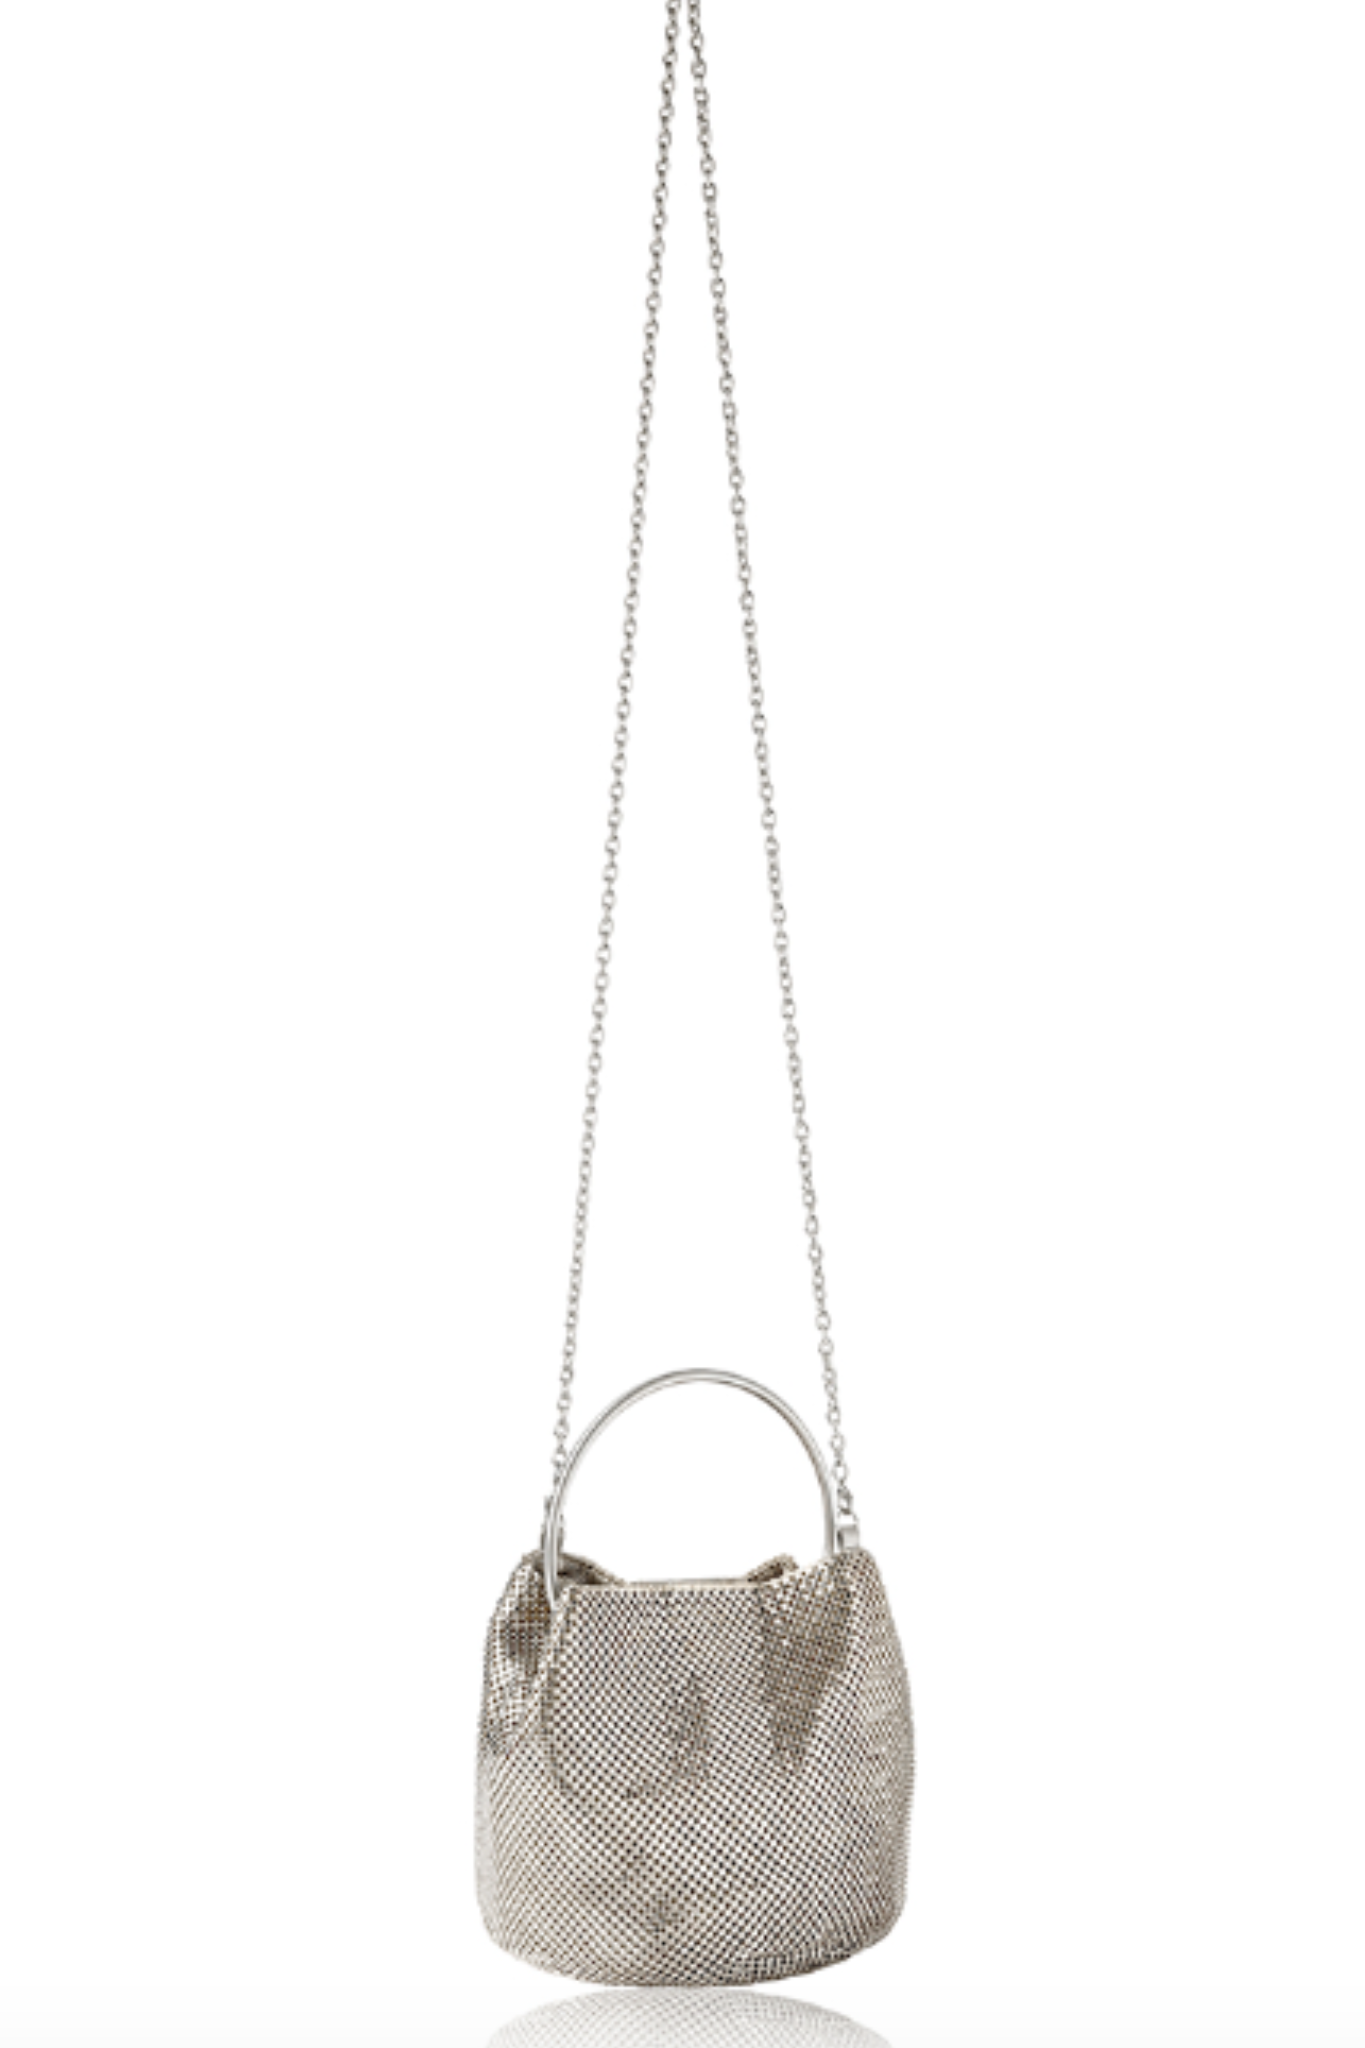 Crescent Bracelet Bag in Pewter by Whiting and Davis - RENTAL